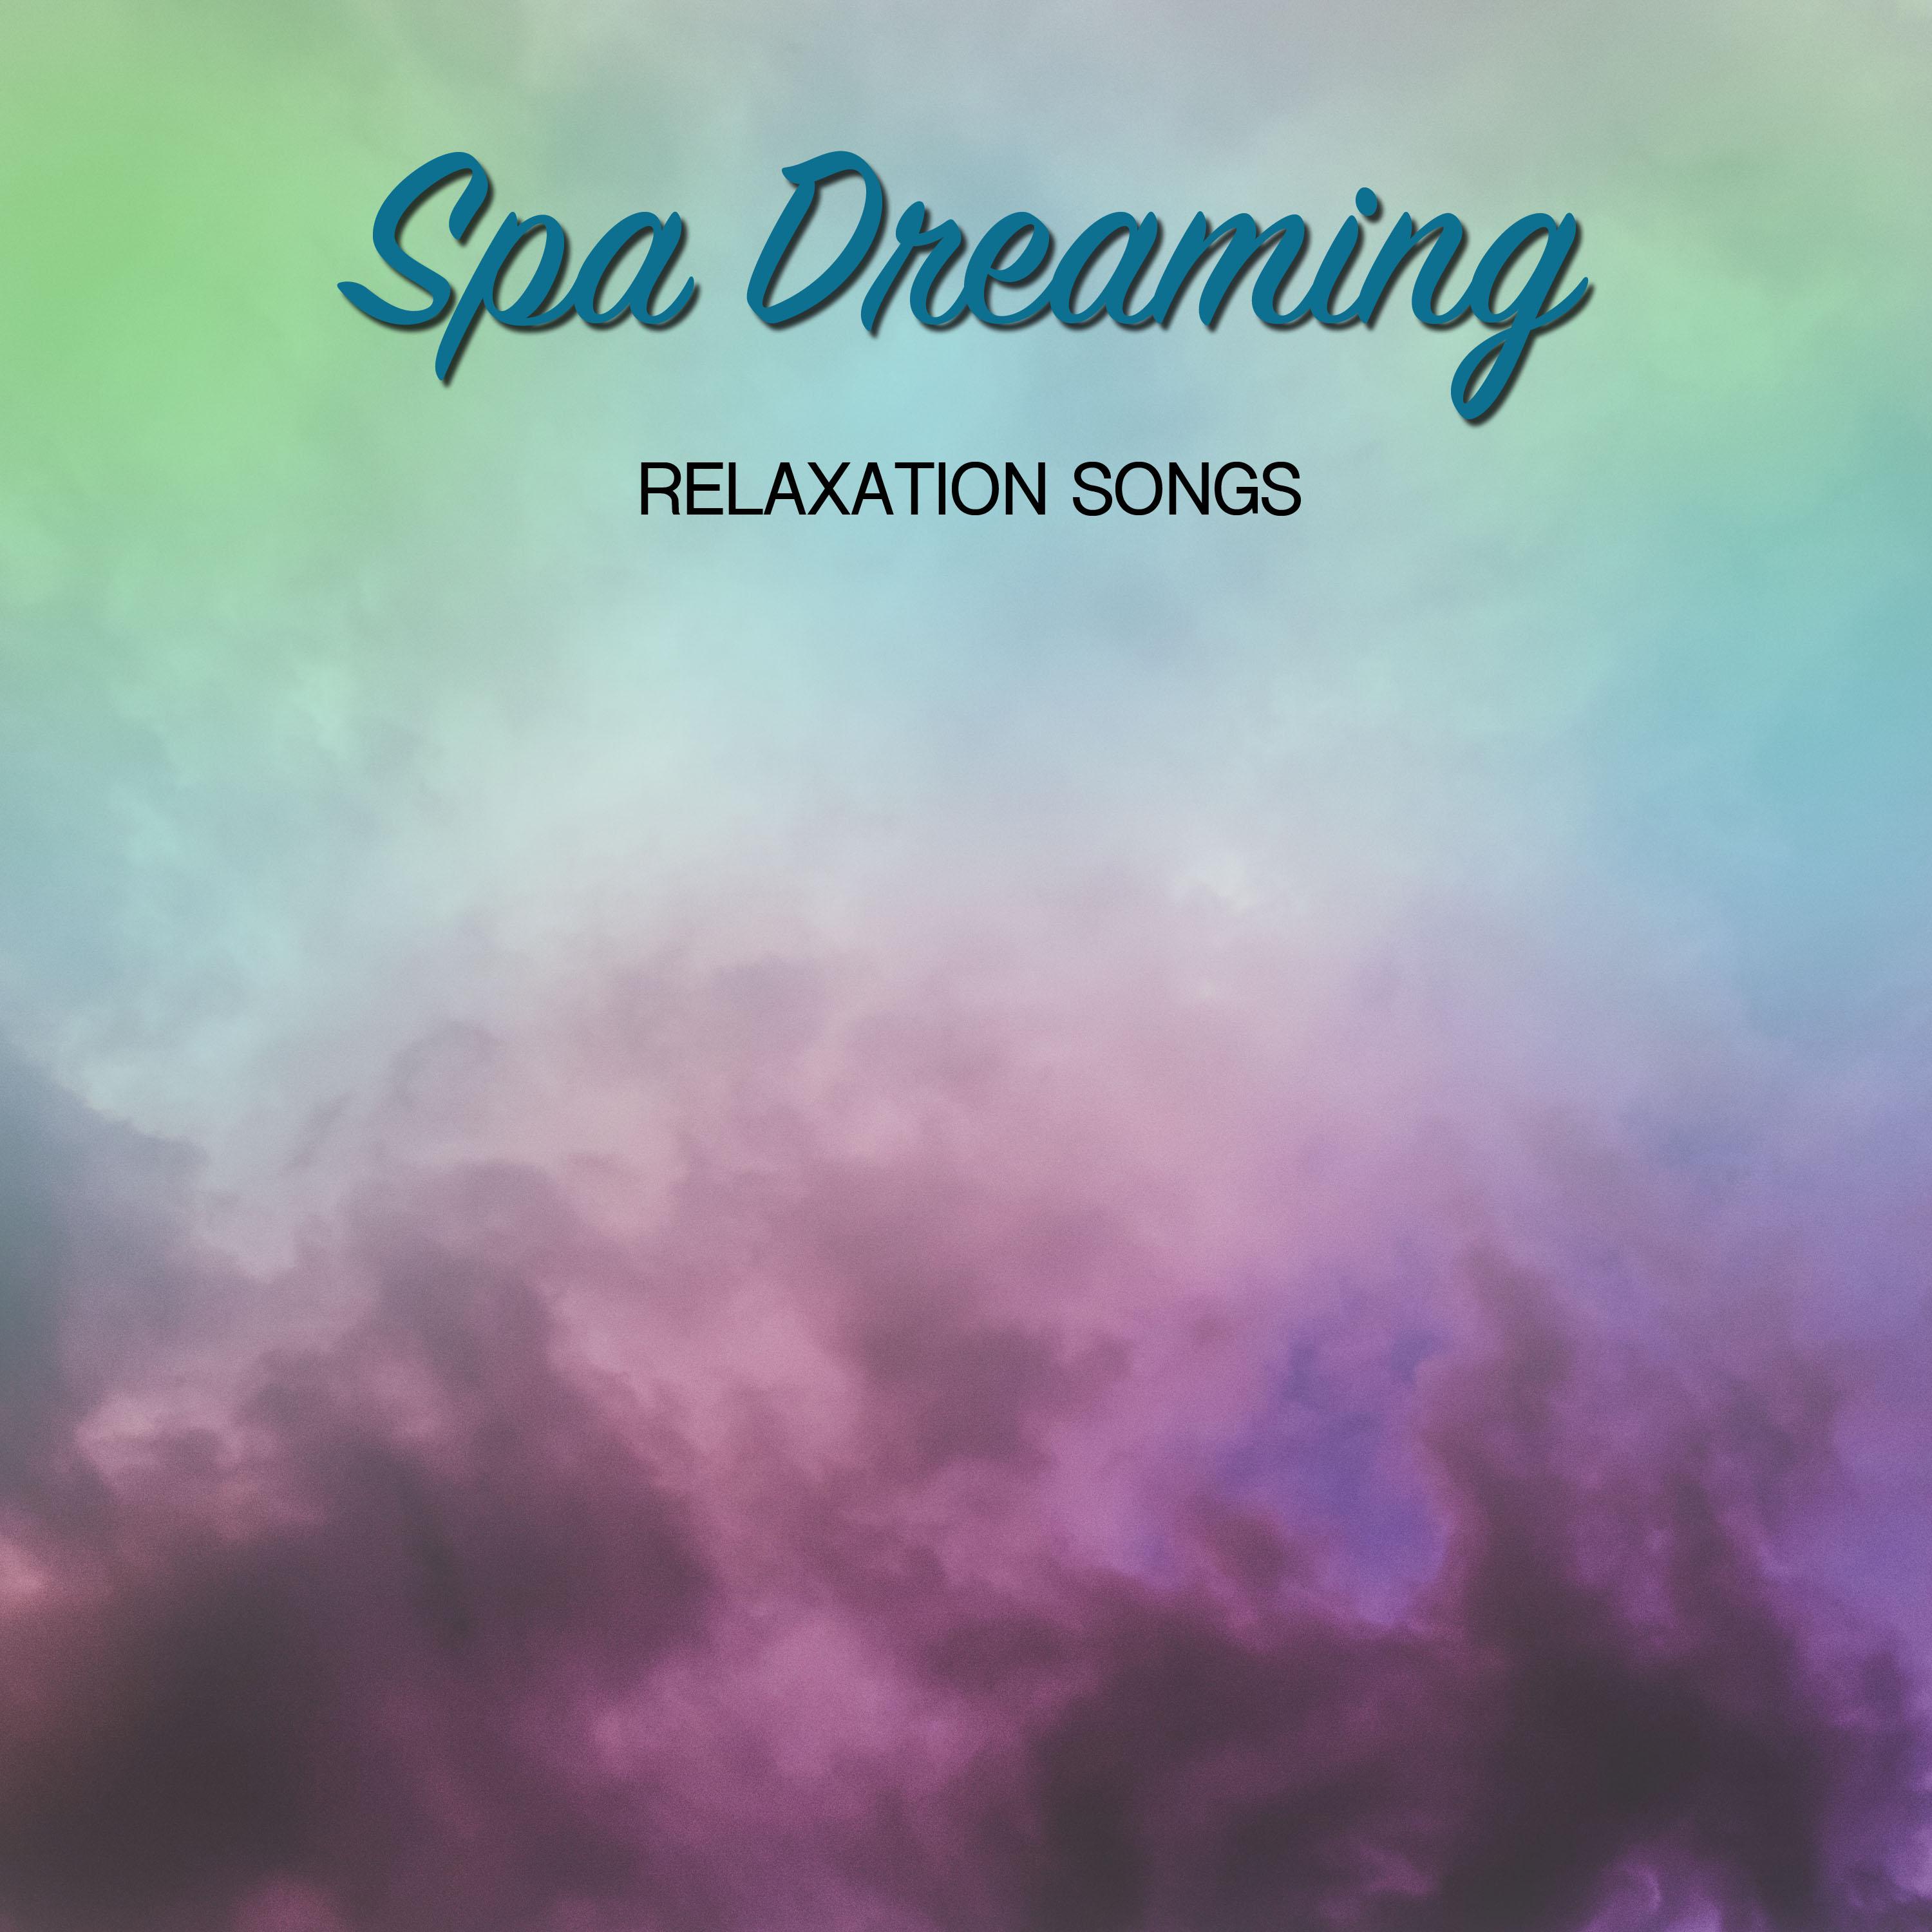 13 Spa Dreaming Relaxation Songs